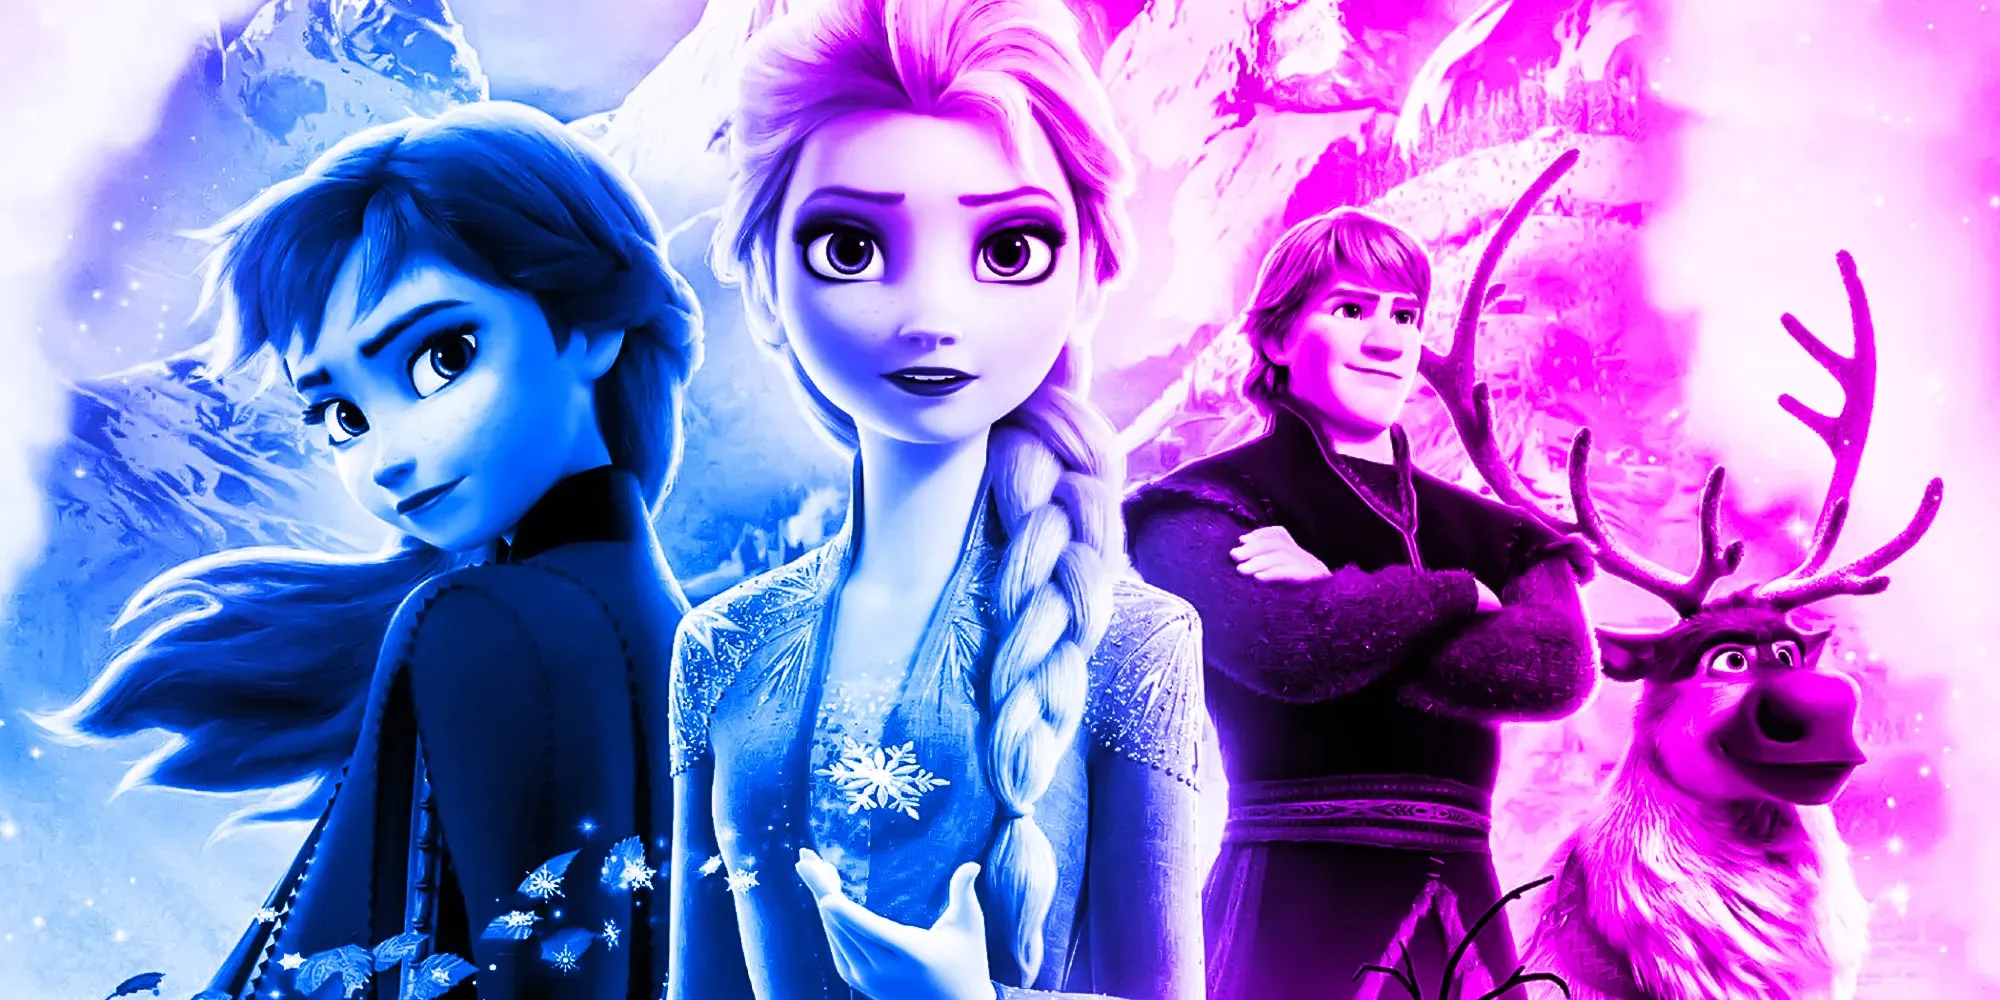 Upcoming Movies - Frozen 3 will be coming and it will be